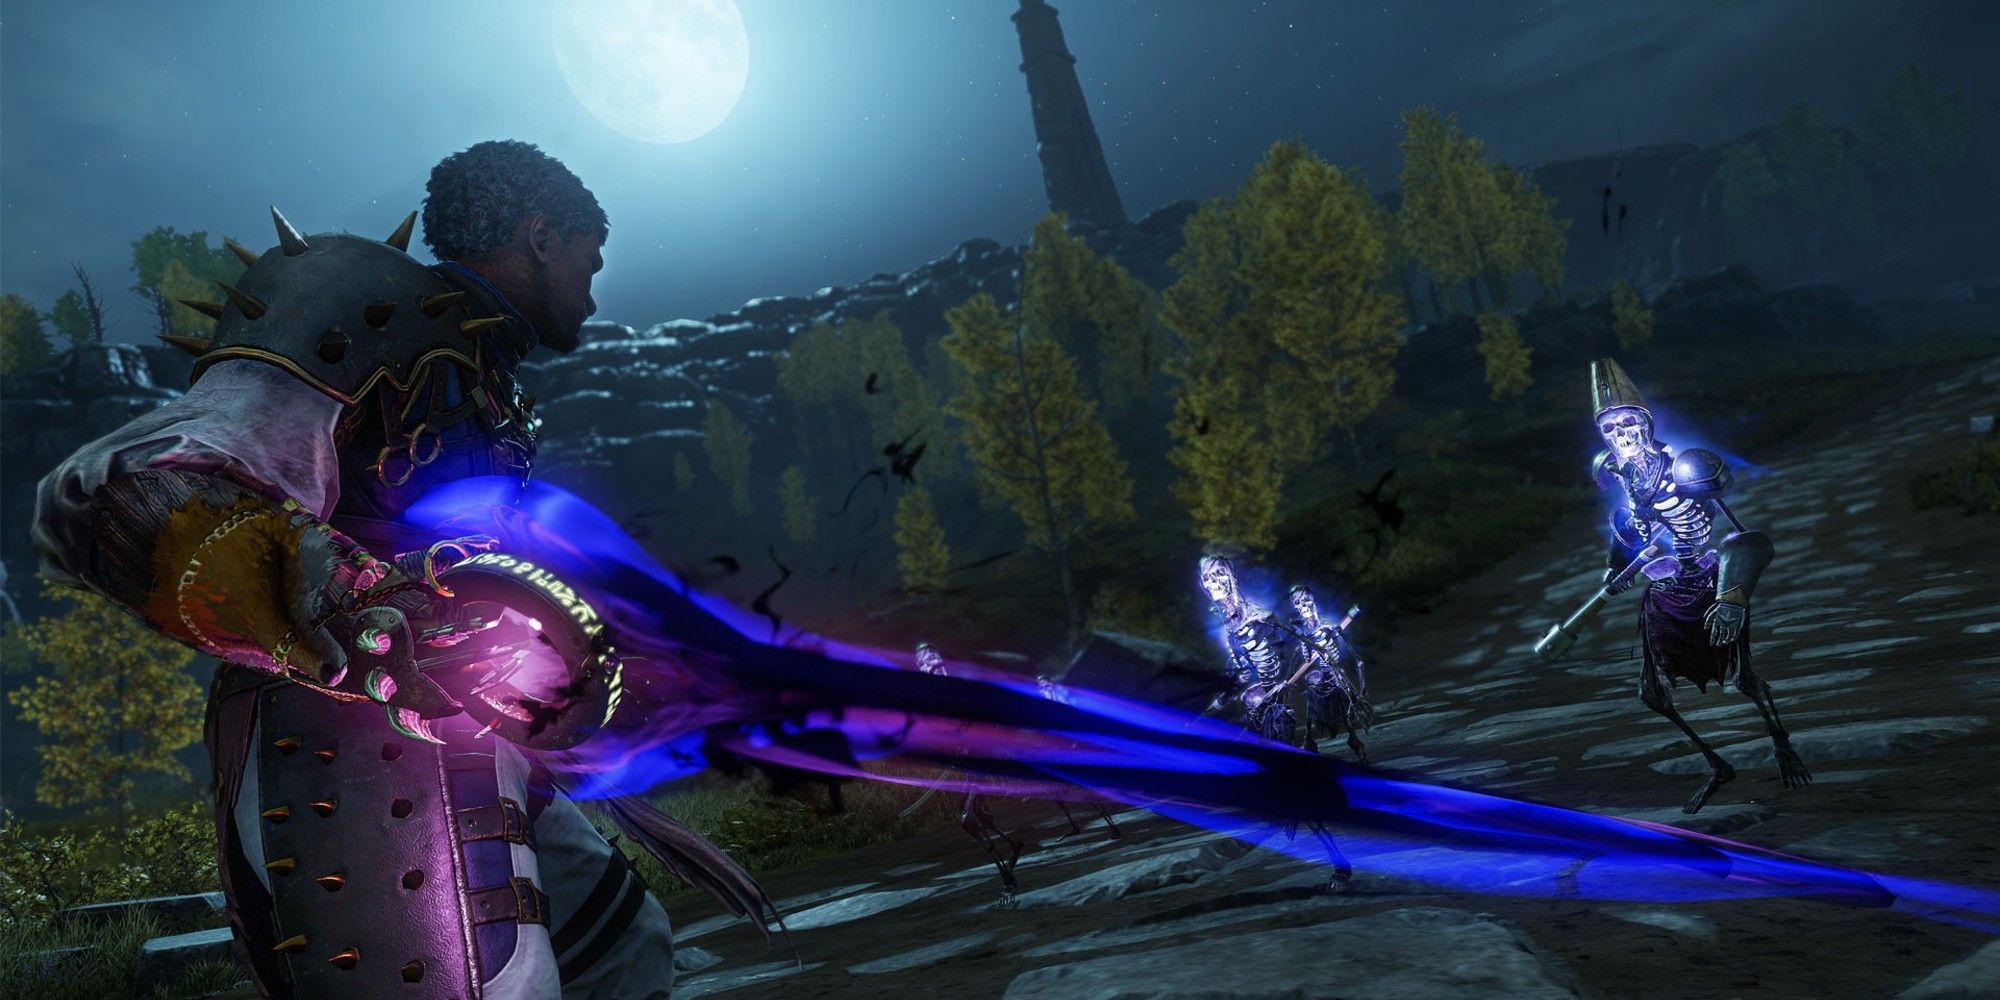 A player fights skeletons using the Void Gauntlet in New World